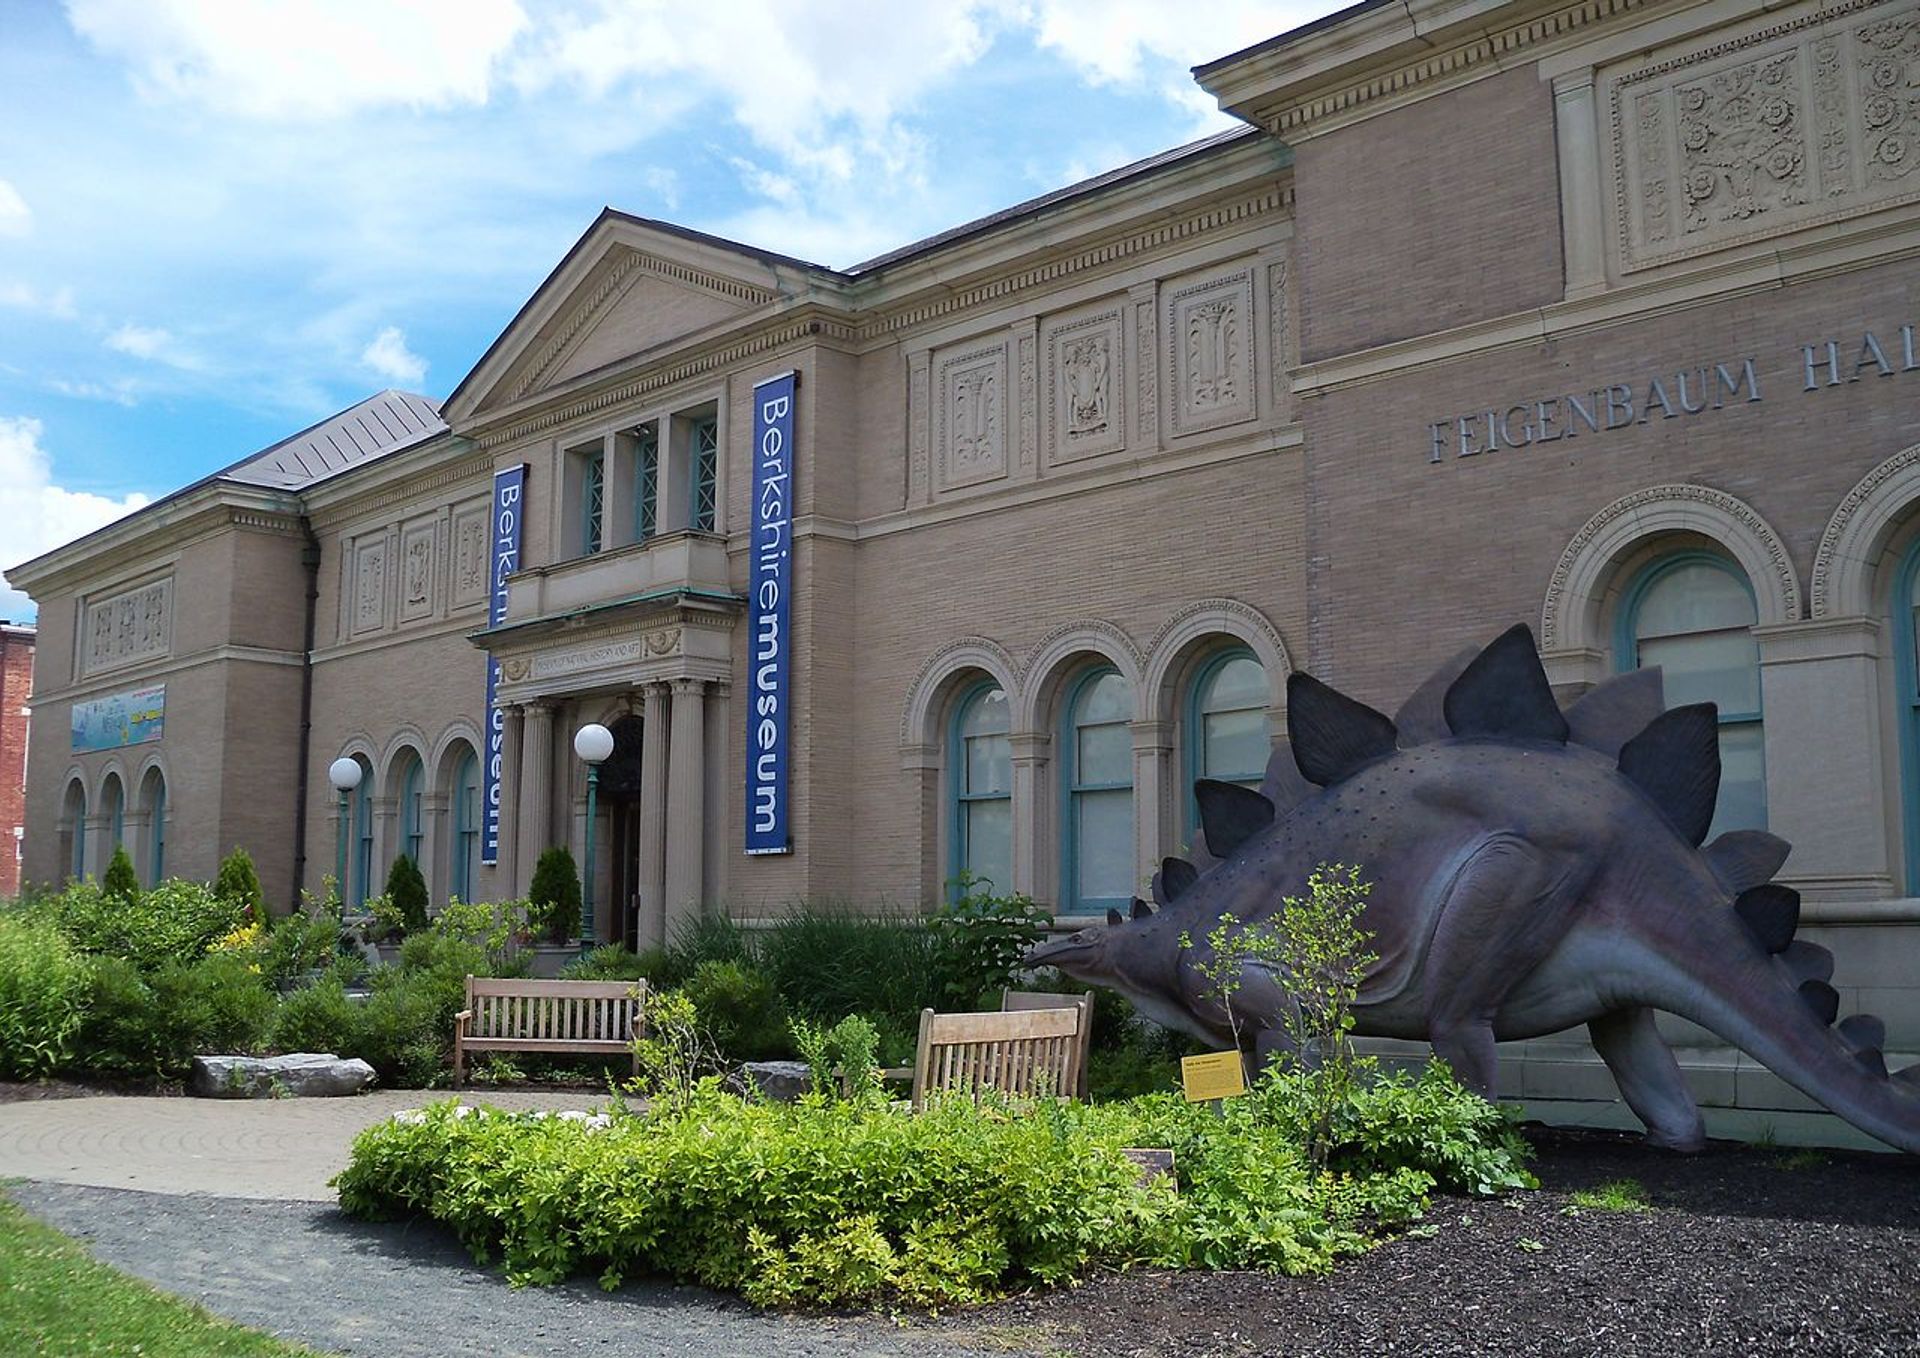 The Berkshire Museum in Pittsfield, Massachusetts. The Association of Art Museum Directors imposed sanctions on the institution in 2018 after it sold works of art to create an endowment and make capital improvements. AlexiusHoratius